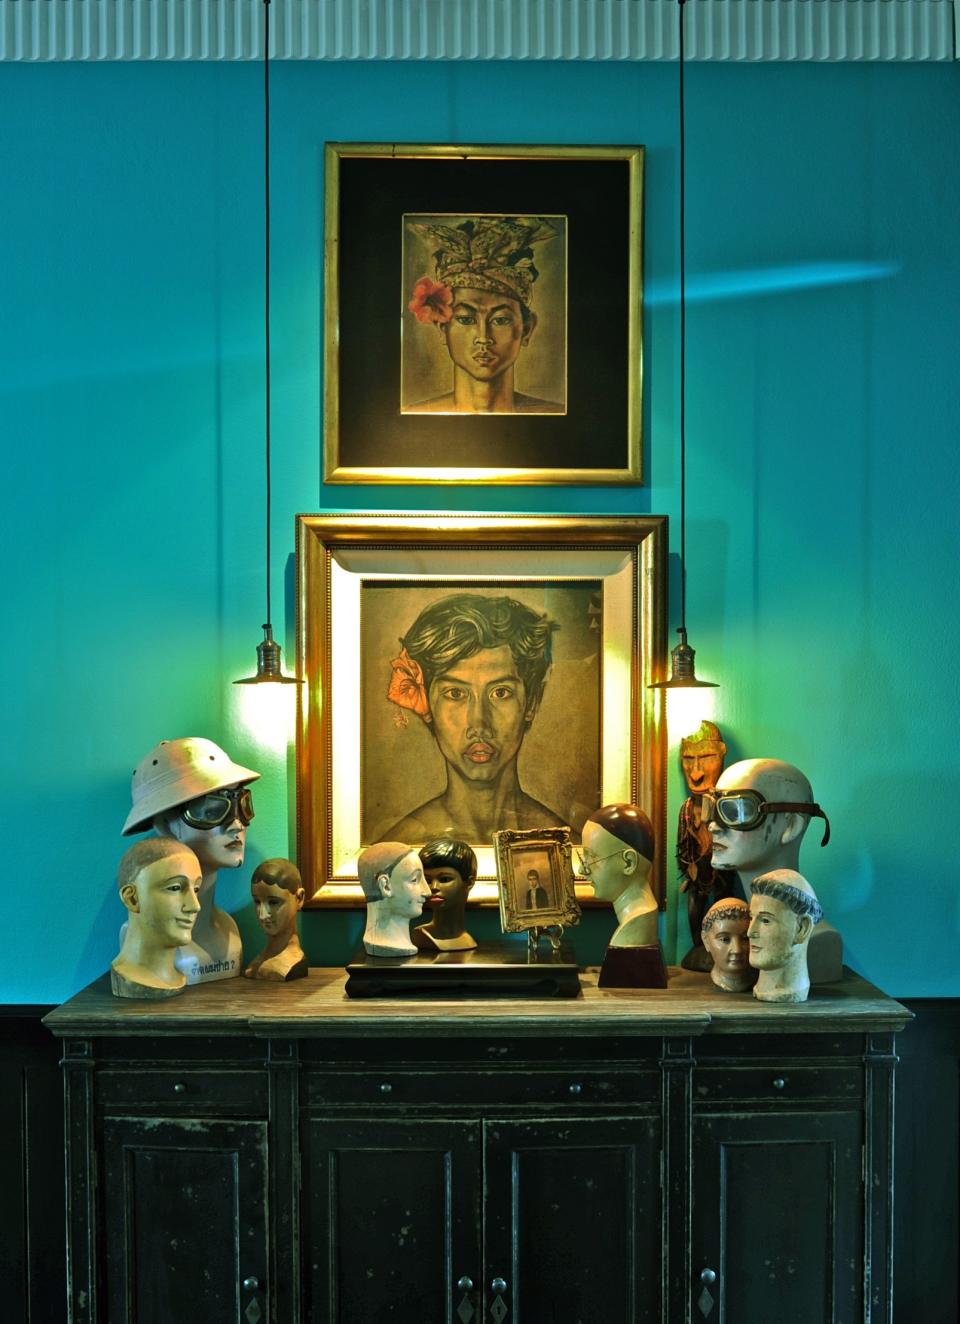 A lover of antiques, Bensley has filled his home with his finds from around the globe.